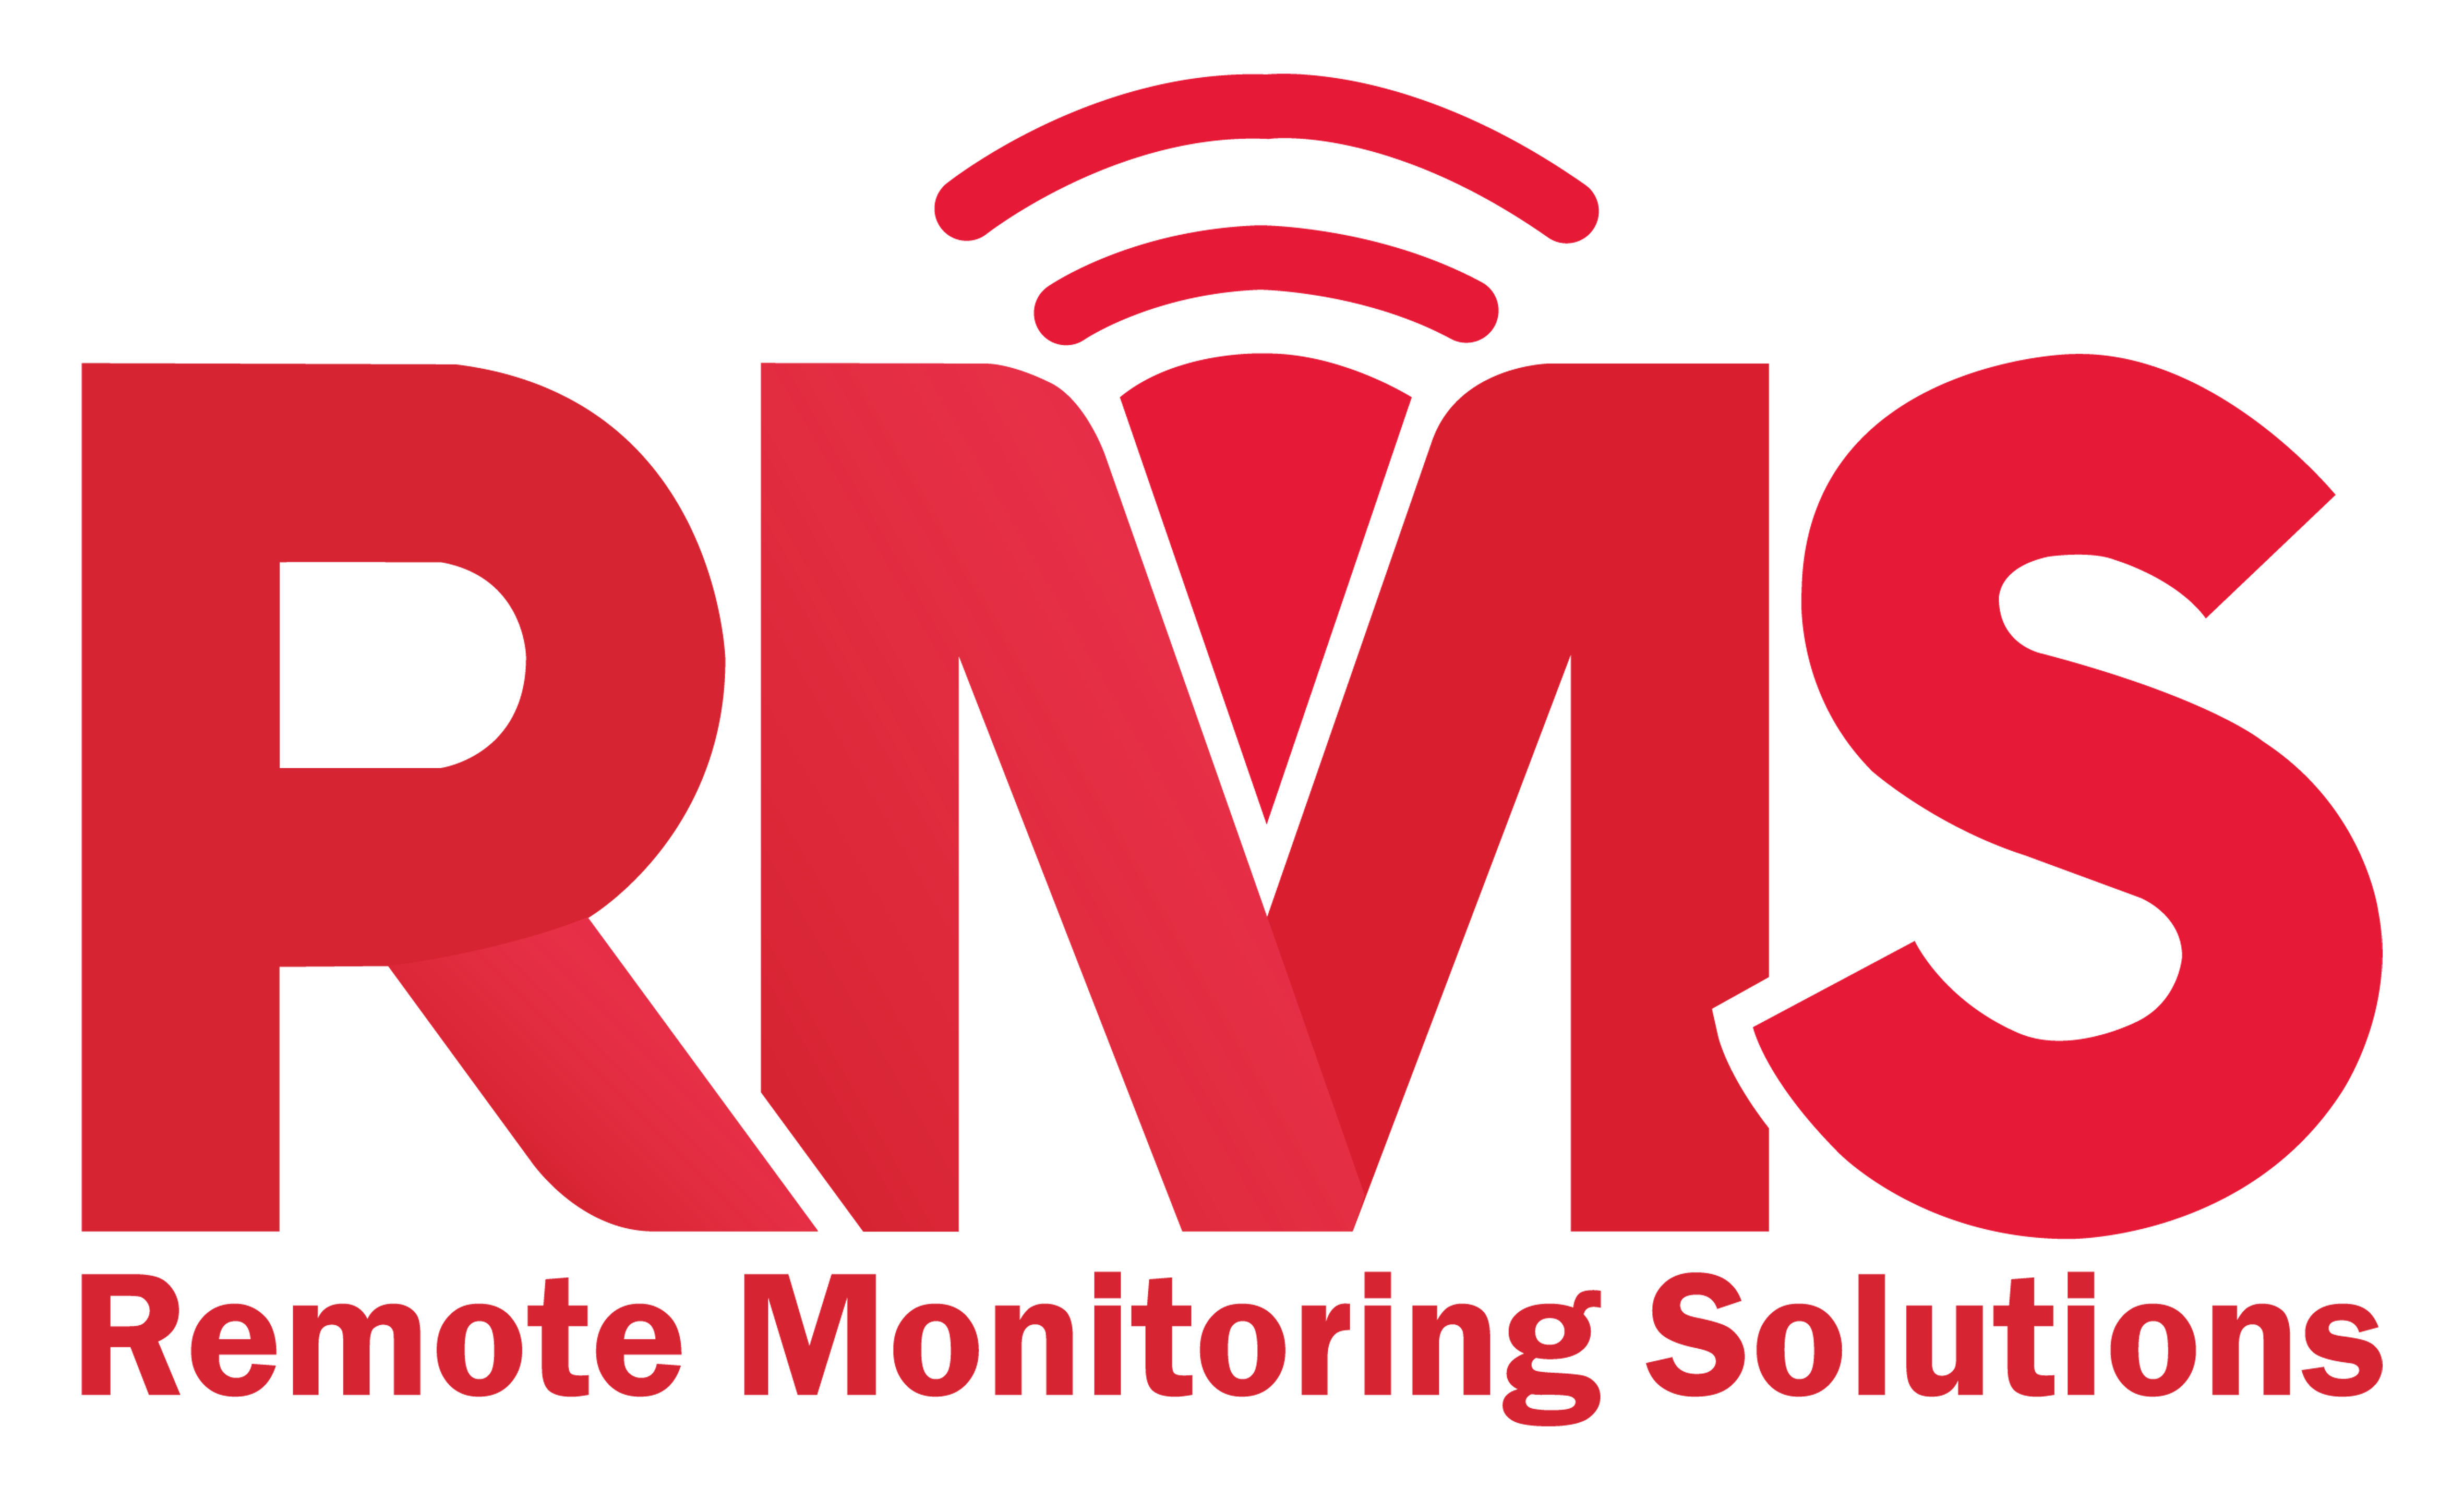 Remote Monitoring Solutions